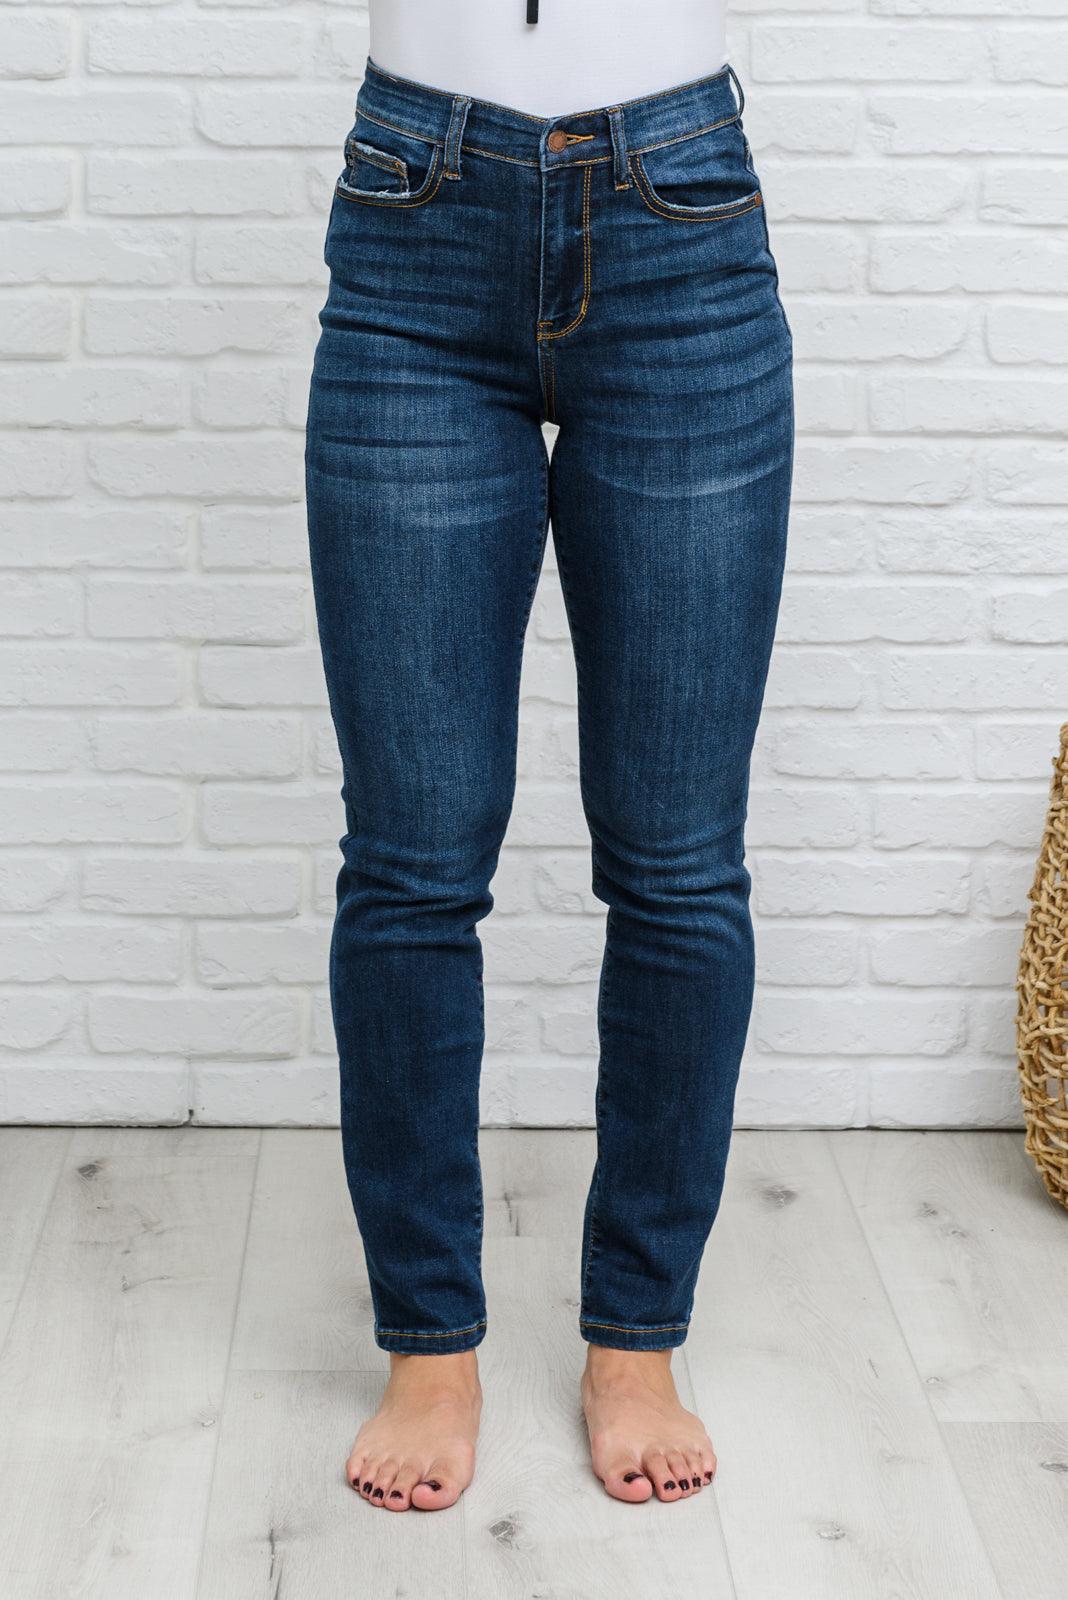 Reba Hi-Rise Clean Relaxed Fit Jeans - The Fiery Jasmine